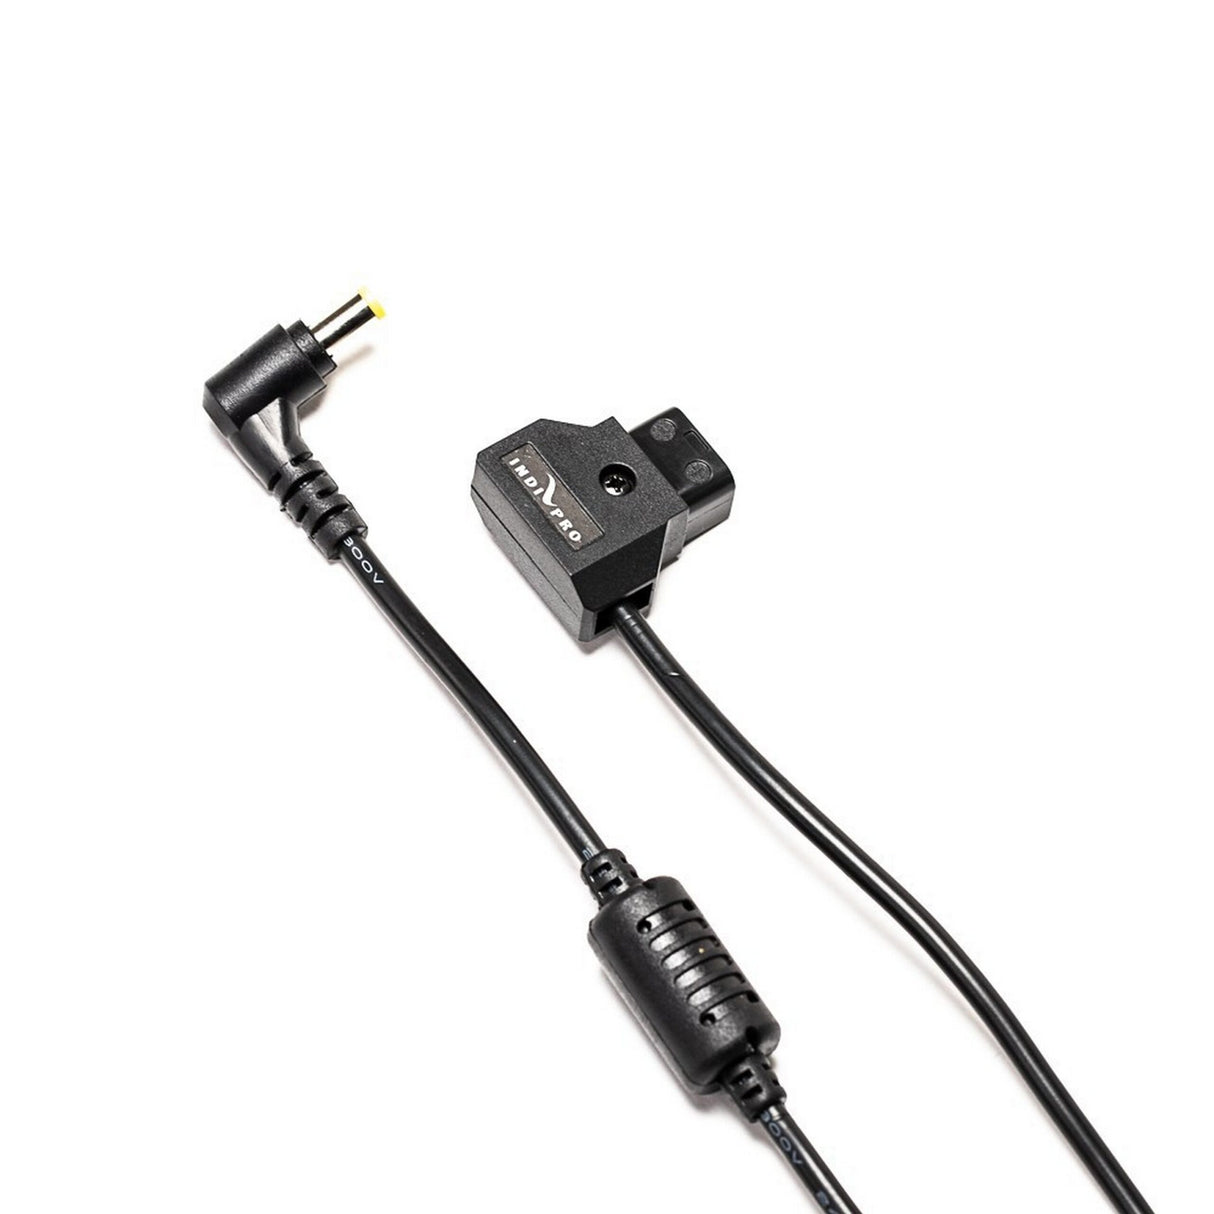 IndiPRO DPXW20 D-Tap to DC Power Cable for Sony PXW-FS7 Camera, 20-Inch Unregulated